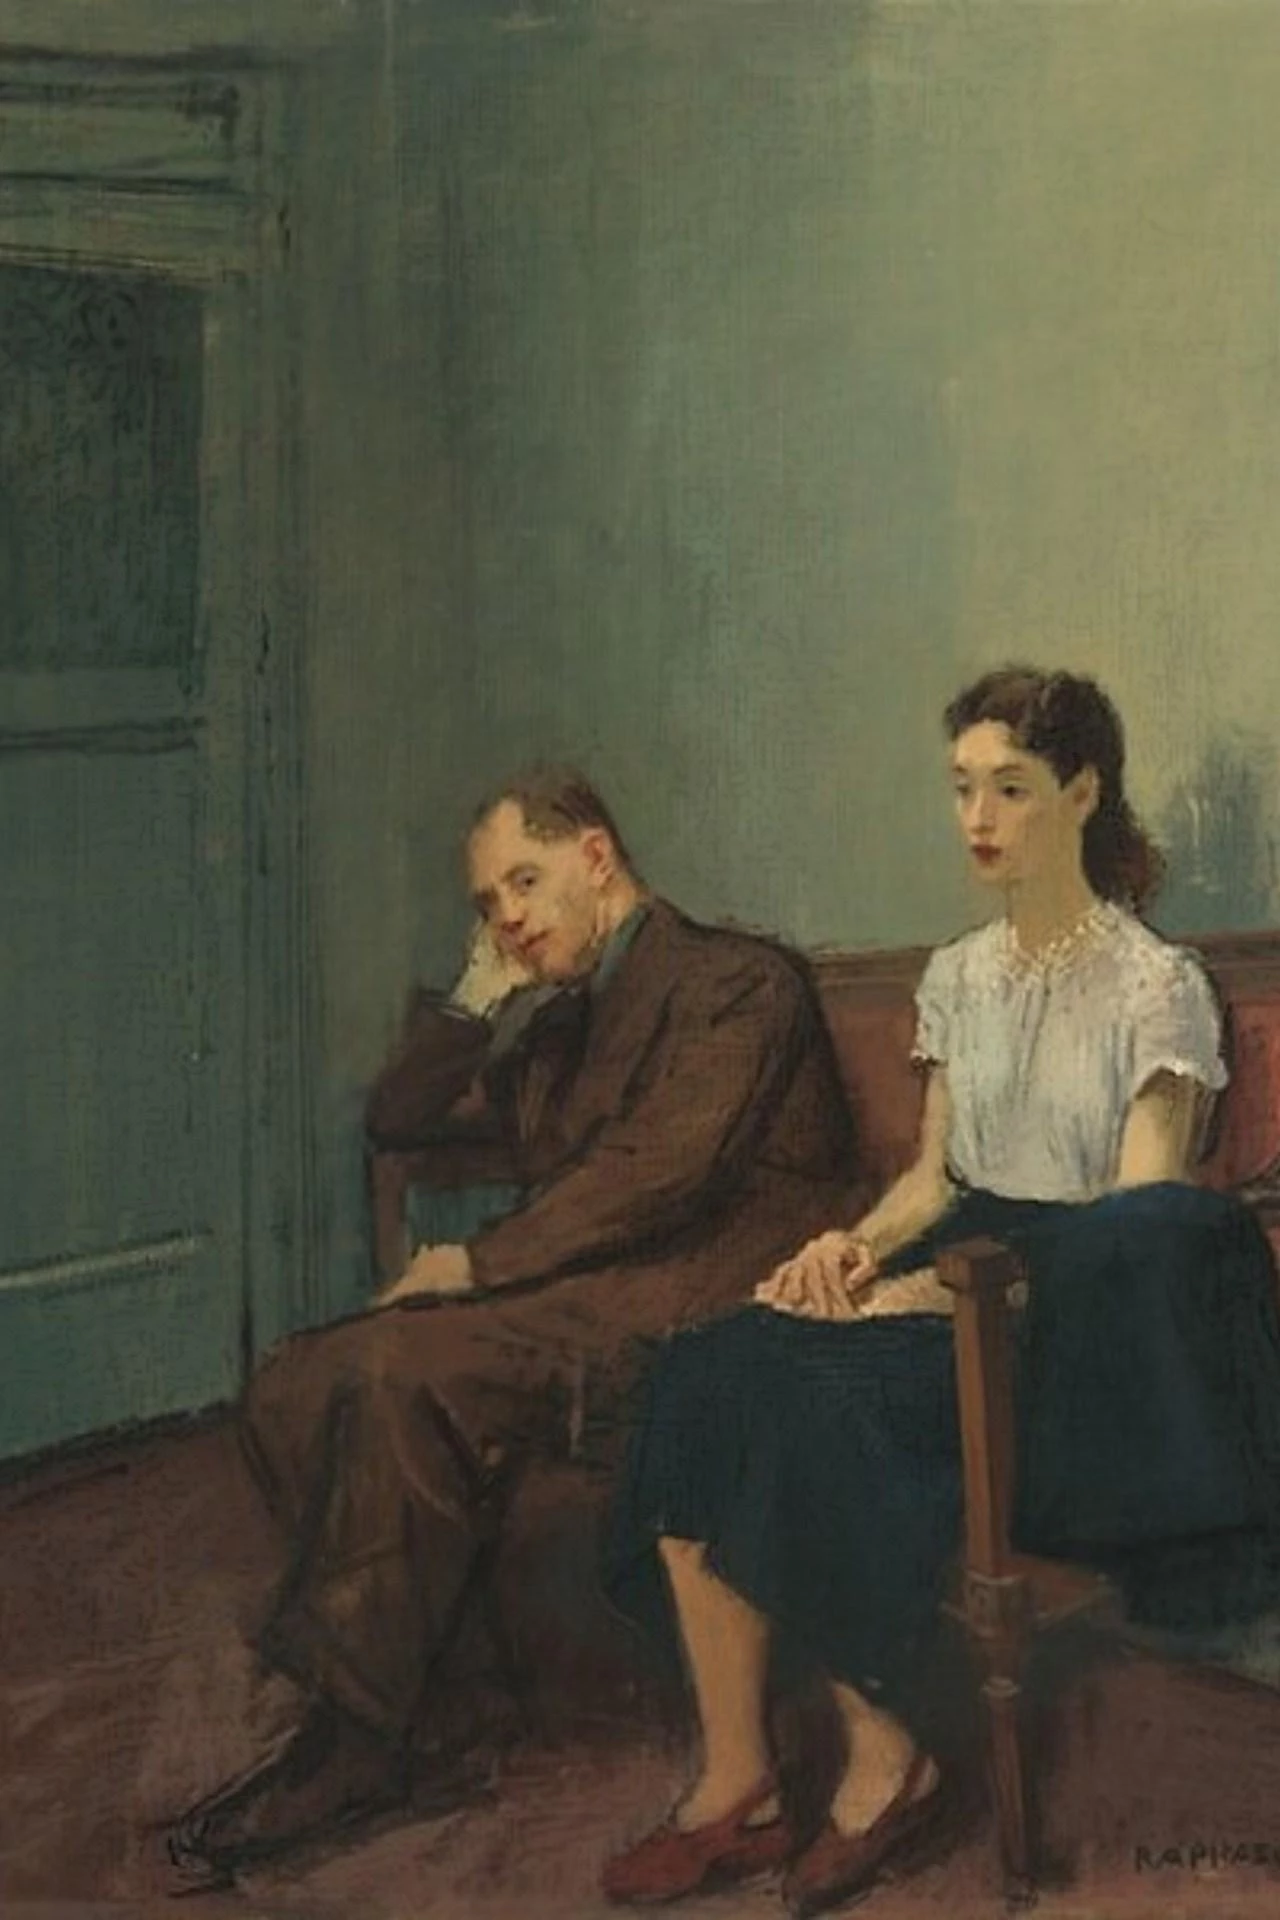 Raphael Soyer, 'Waiting for the Audition,' c. 1950. Image credit: National Gallery of Art